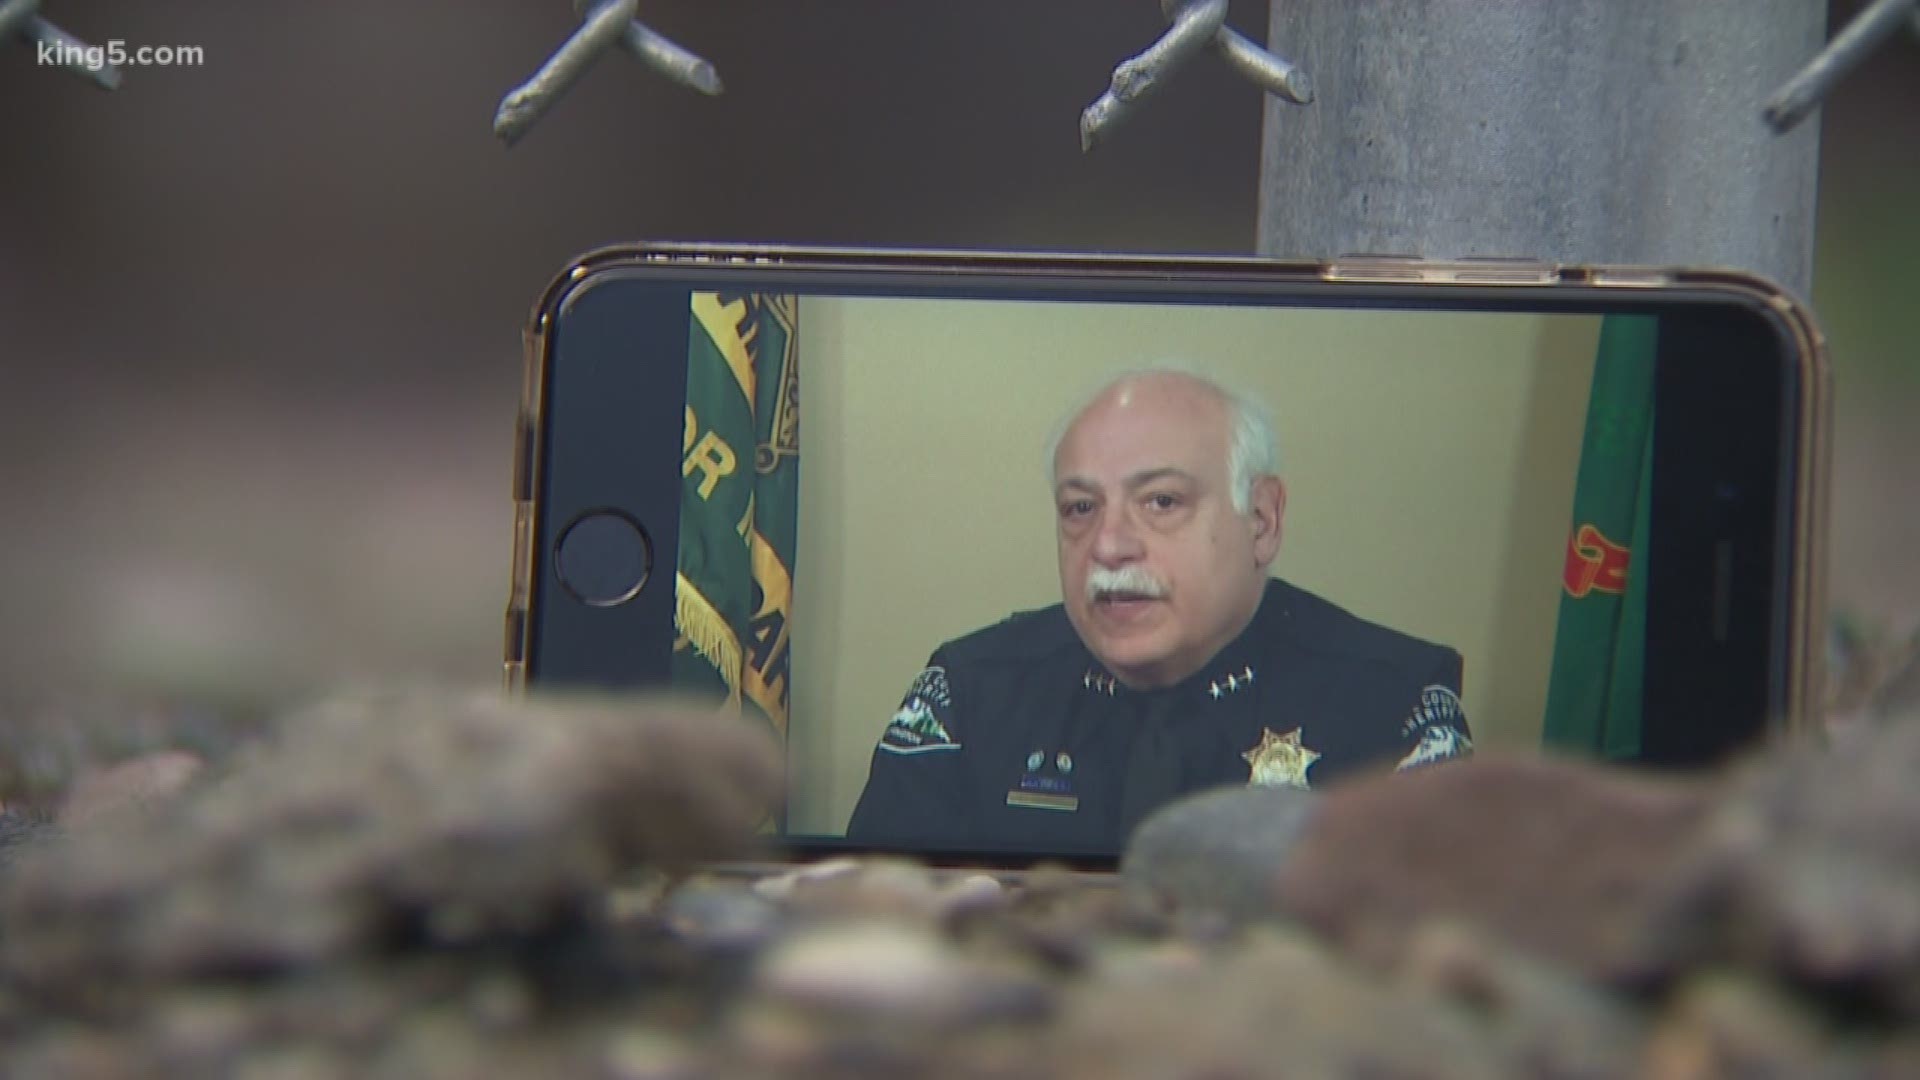 Pierce County Sheriff Paul Pastor is sharing his thoughts on homelessness in the region. Advocates say they're glad to see some nuance in a complicated discussion. KING 5's Michael Crowe reports.